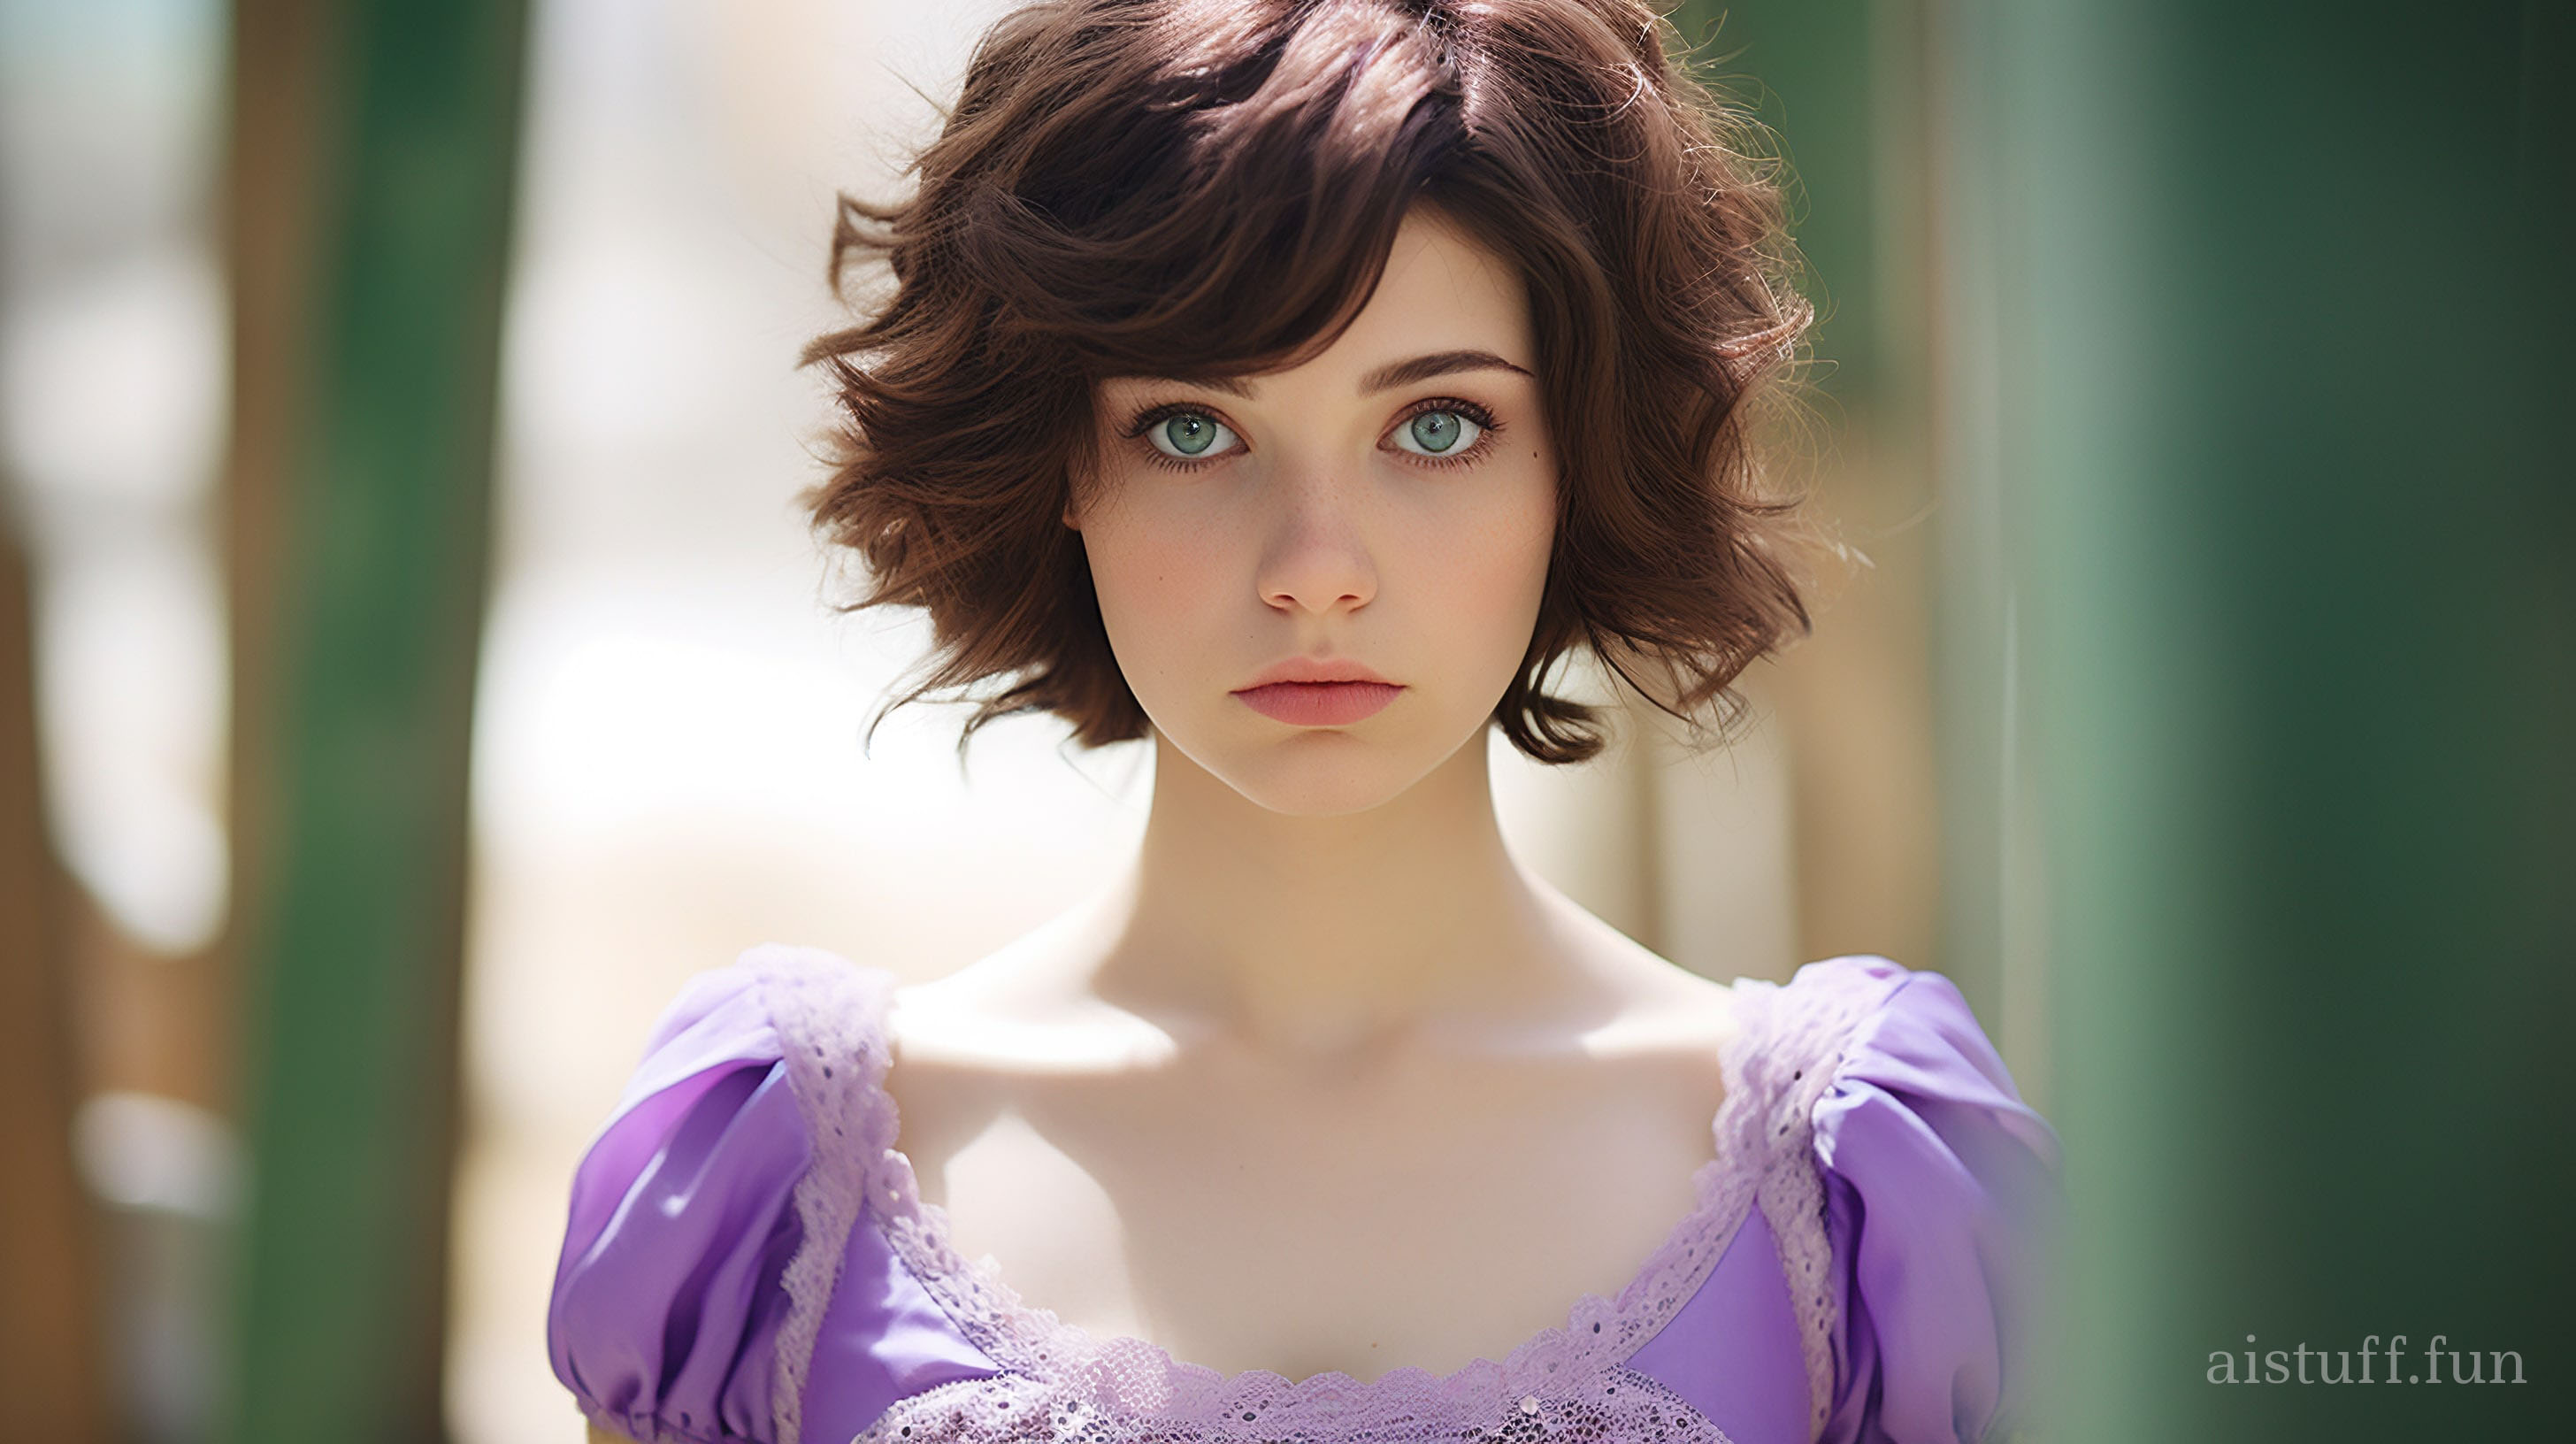 Photo of Rapunzel with short hair in real life